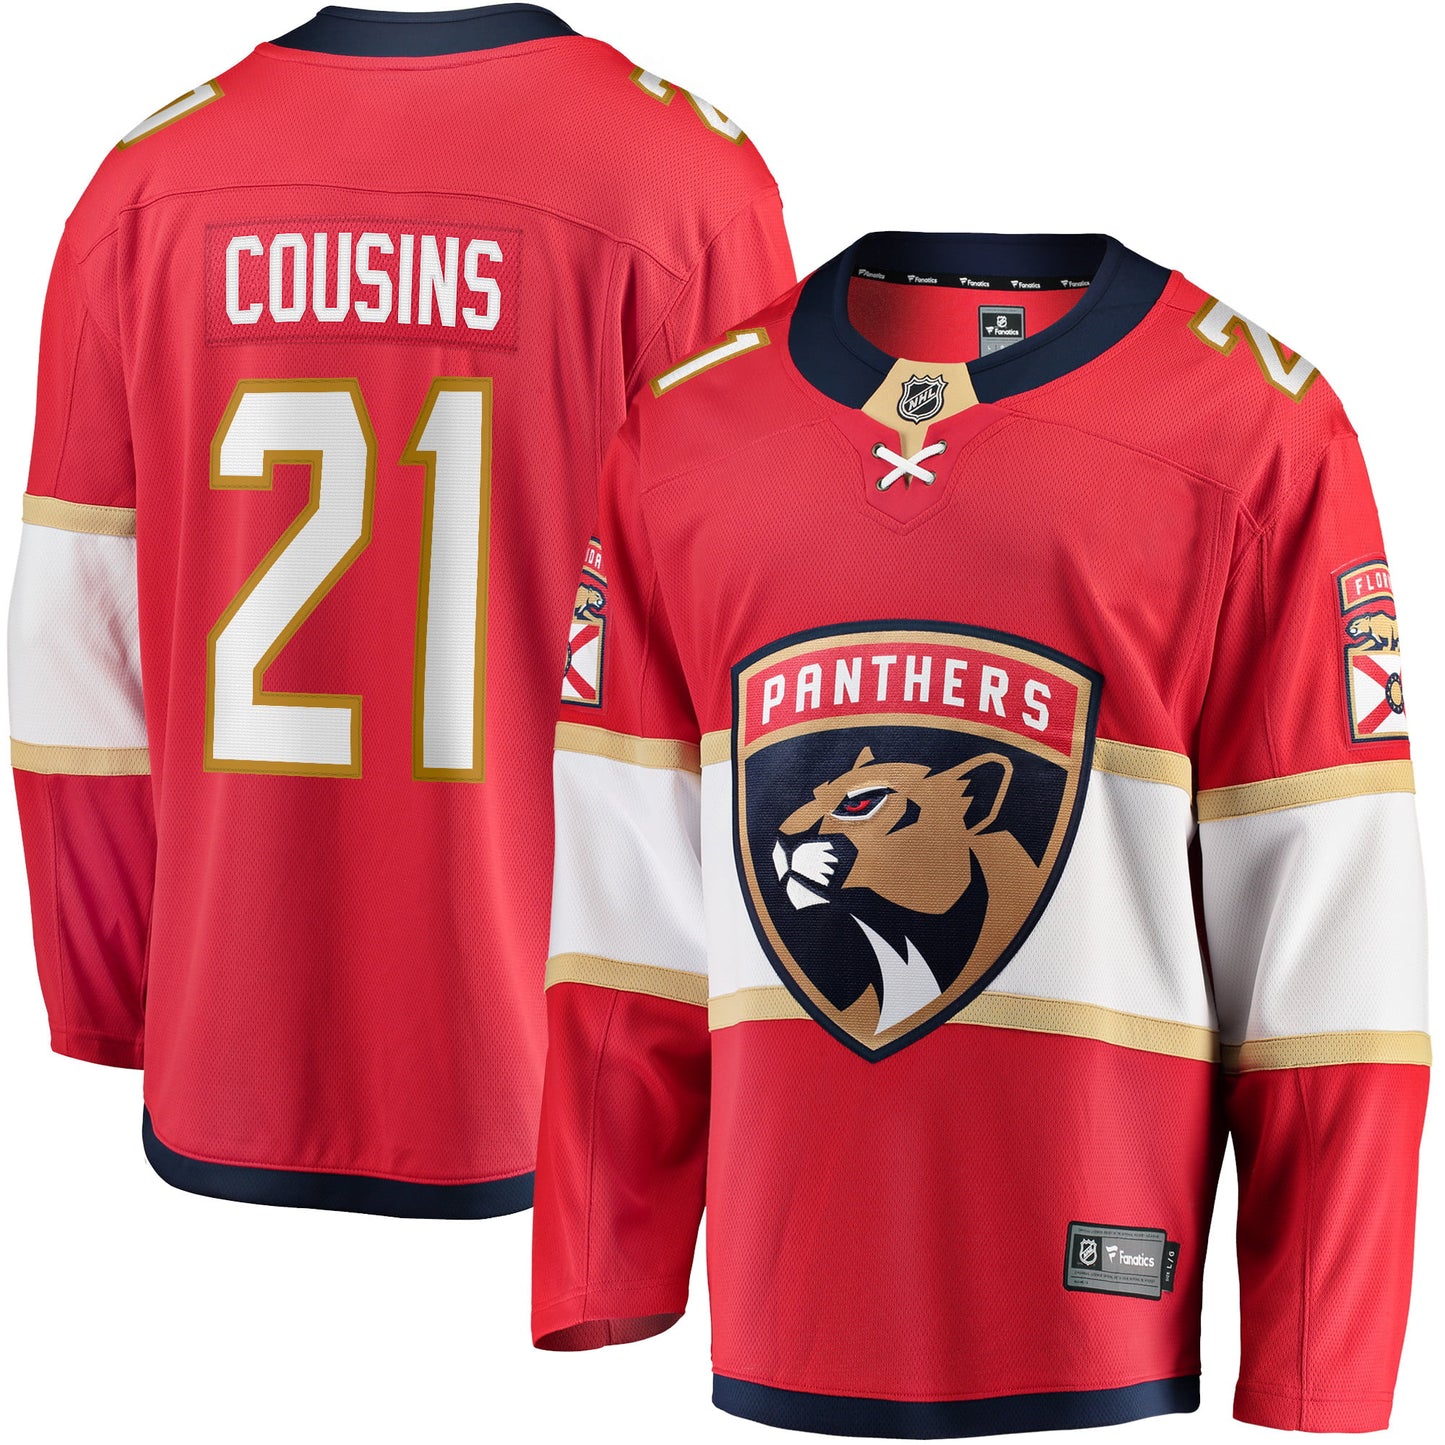 Men's Fanatics Branded Nick Cousins Red Florida Panthers Home Breakaway Player Jersey